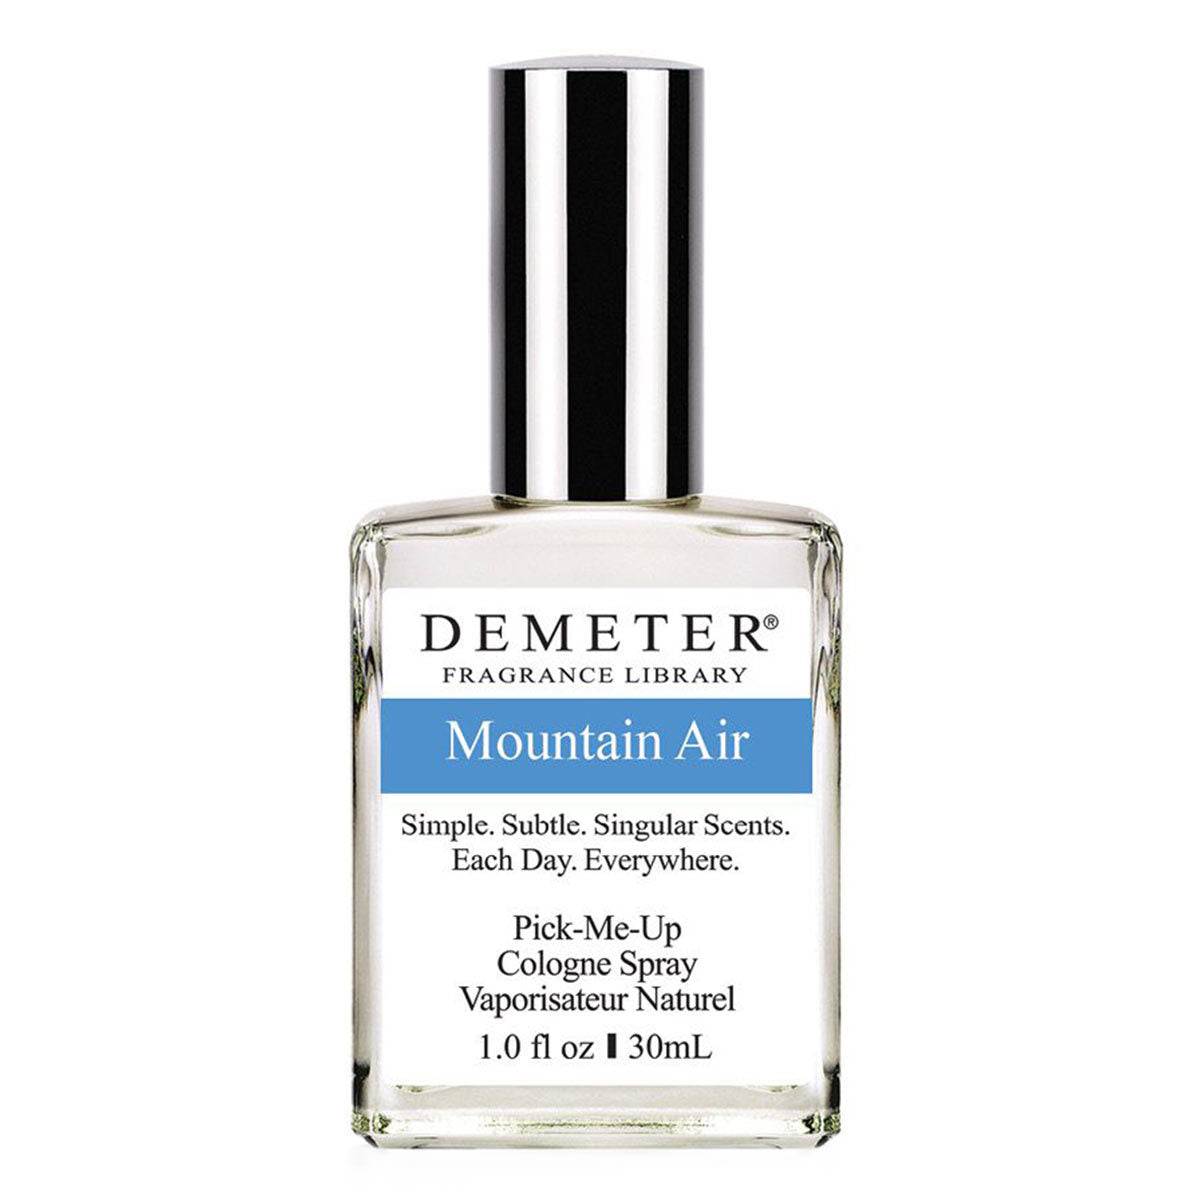 Primary image of Mountain Air Cologne